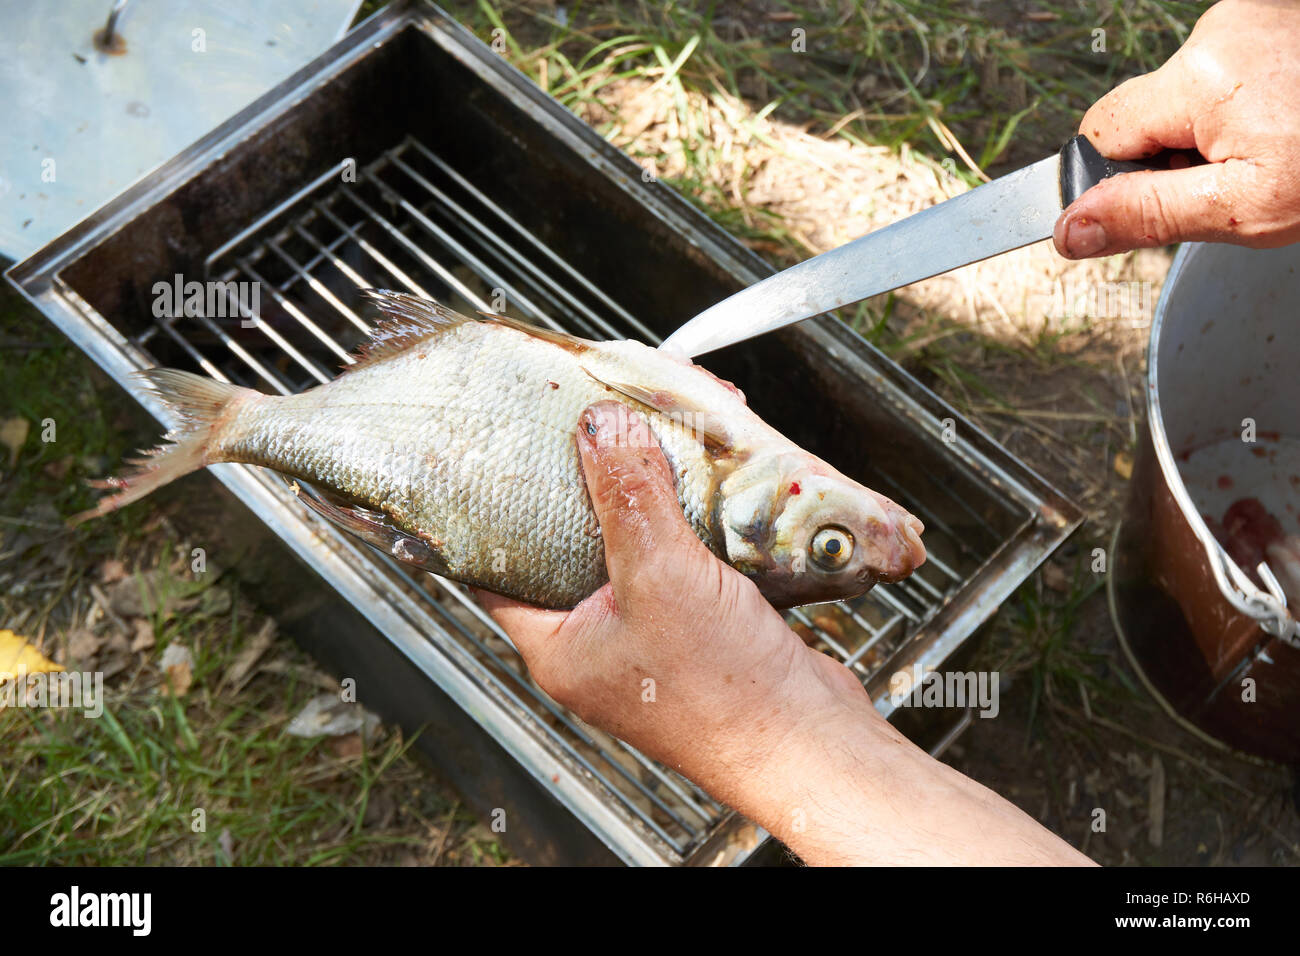 Preparing bream fish for hot food smoked. Removal of the viscera of fish Stock Photo